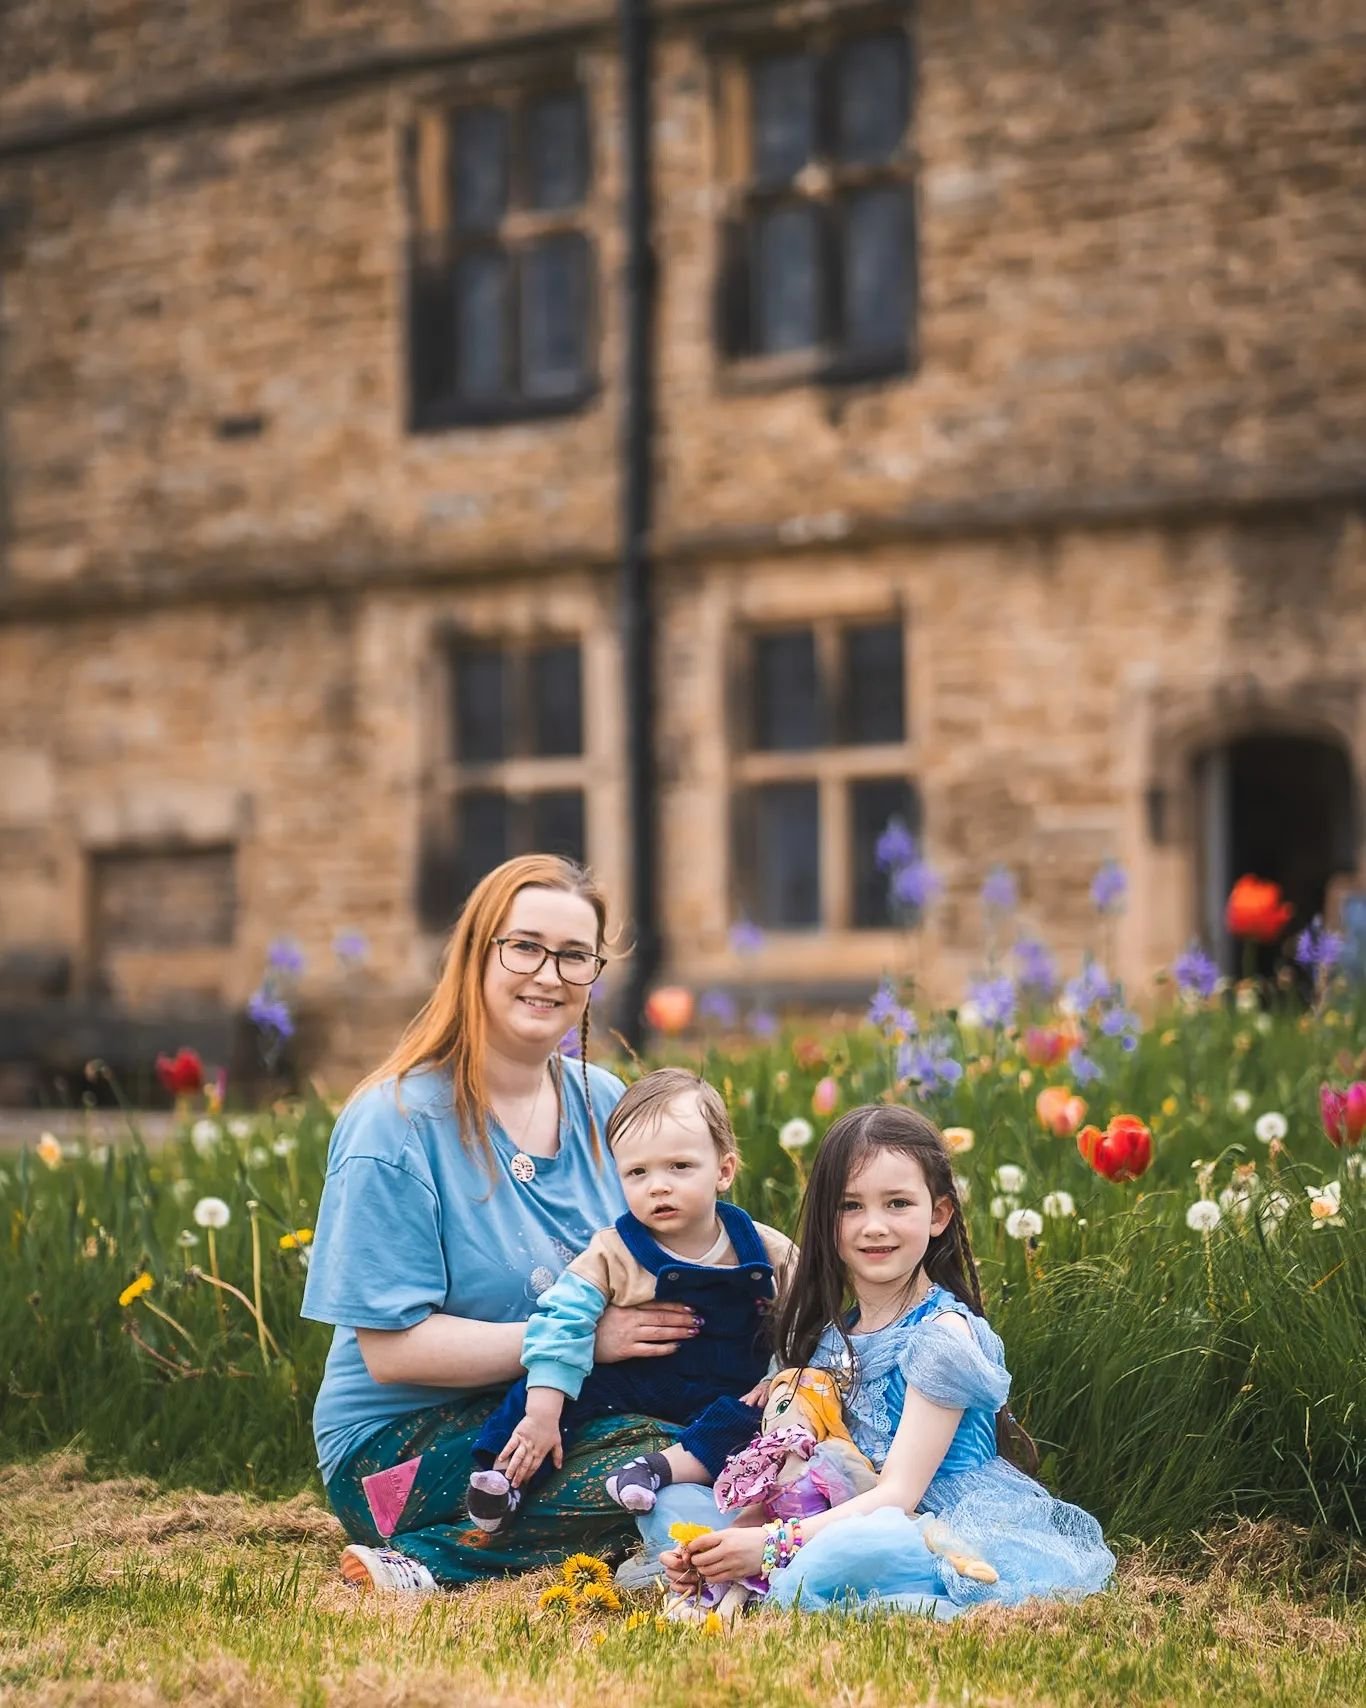 Out for Louisa's birthday at Manor Castle for their Tudor day. I always forget there are things like this on our doorstep. 

#familyphotography #familyphotos #familyportraits #familysessions #familytime #familyfirst #familyphotographer #familyphotosh